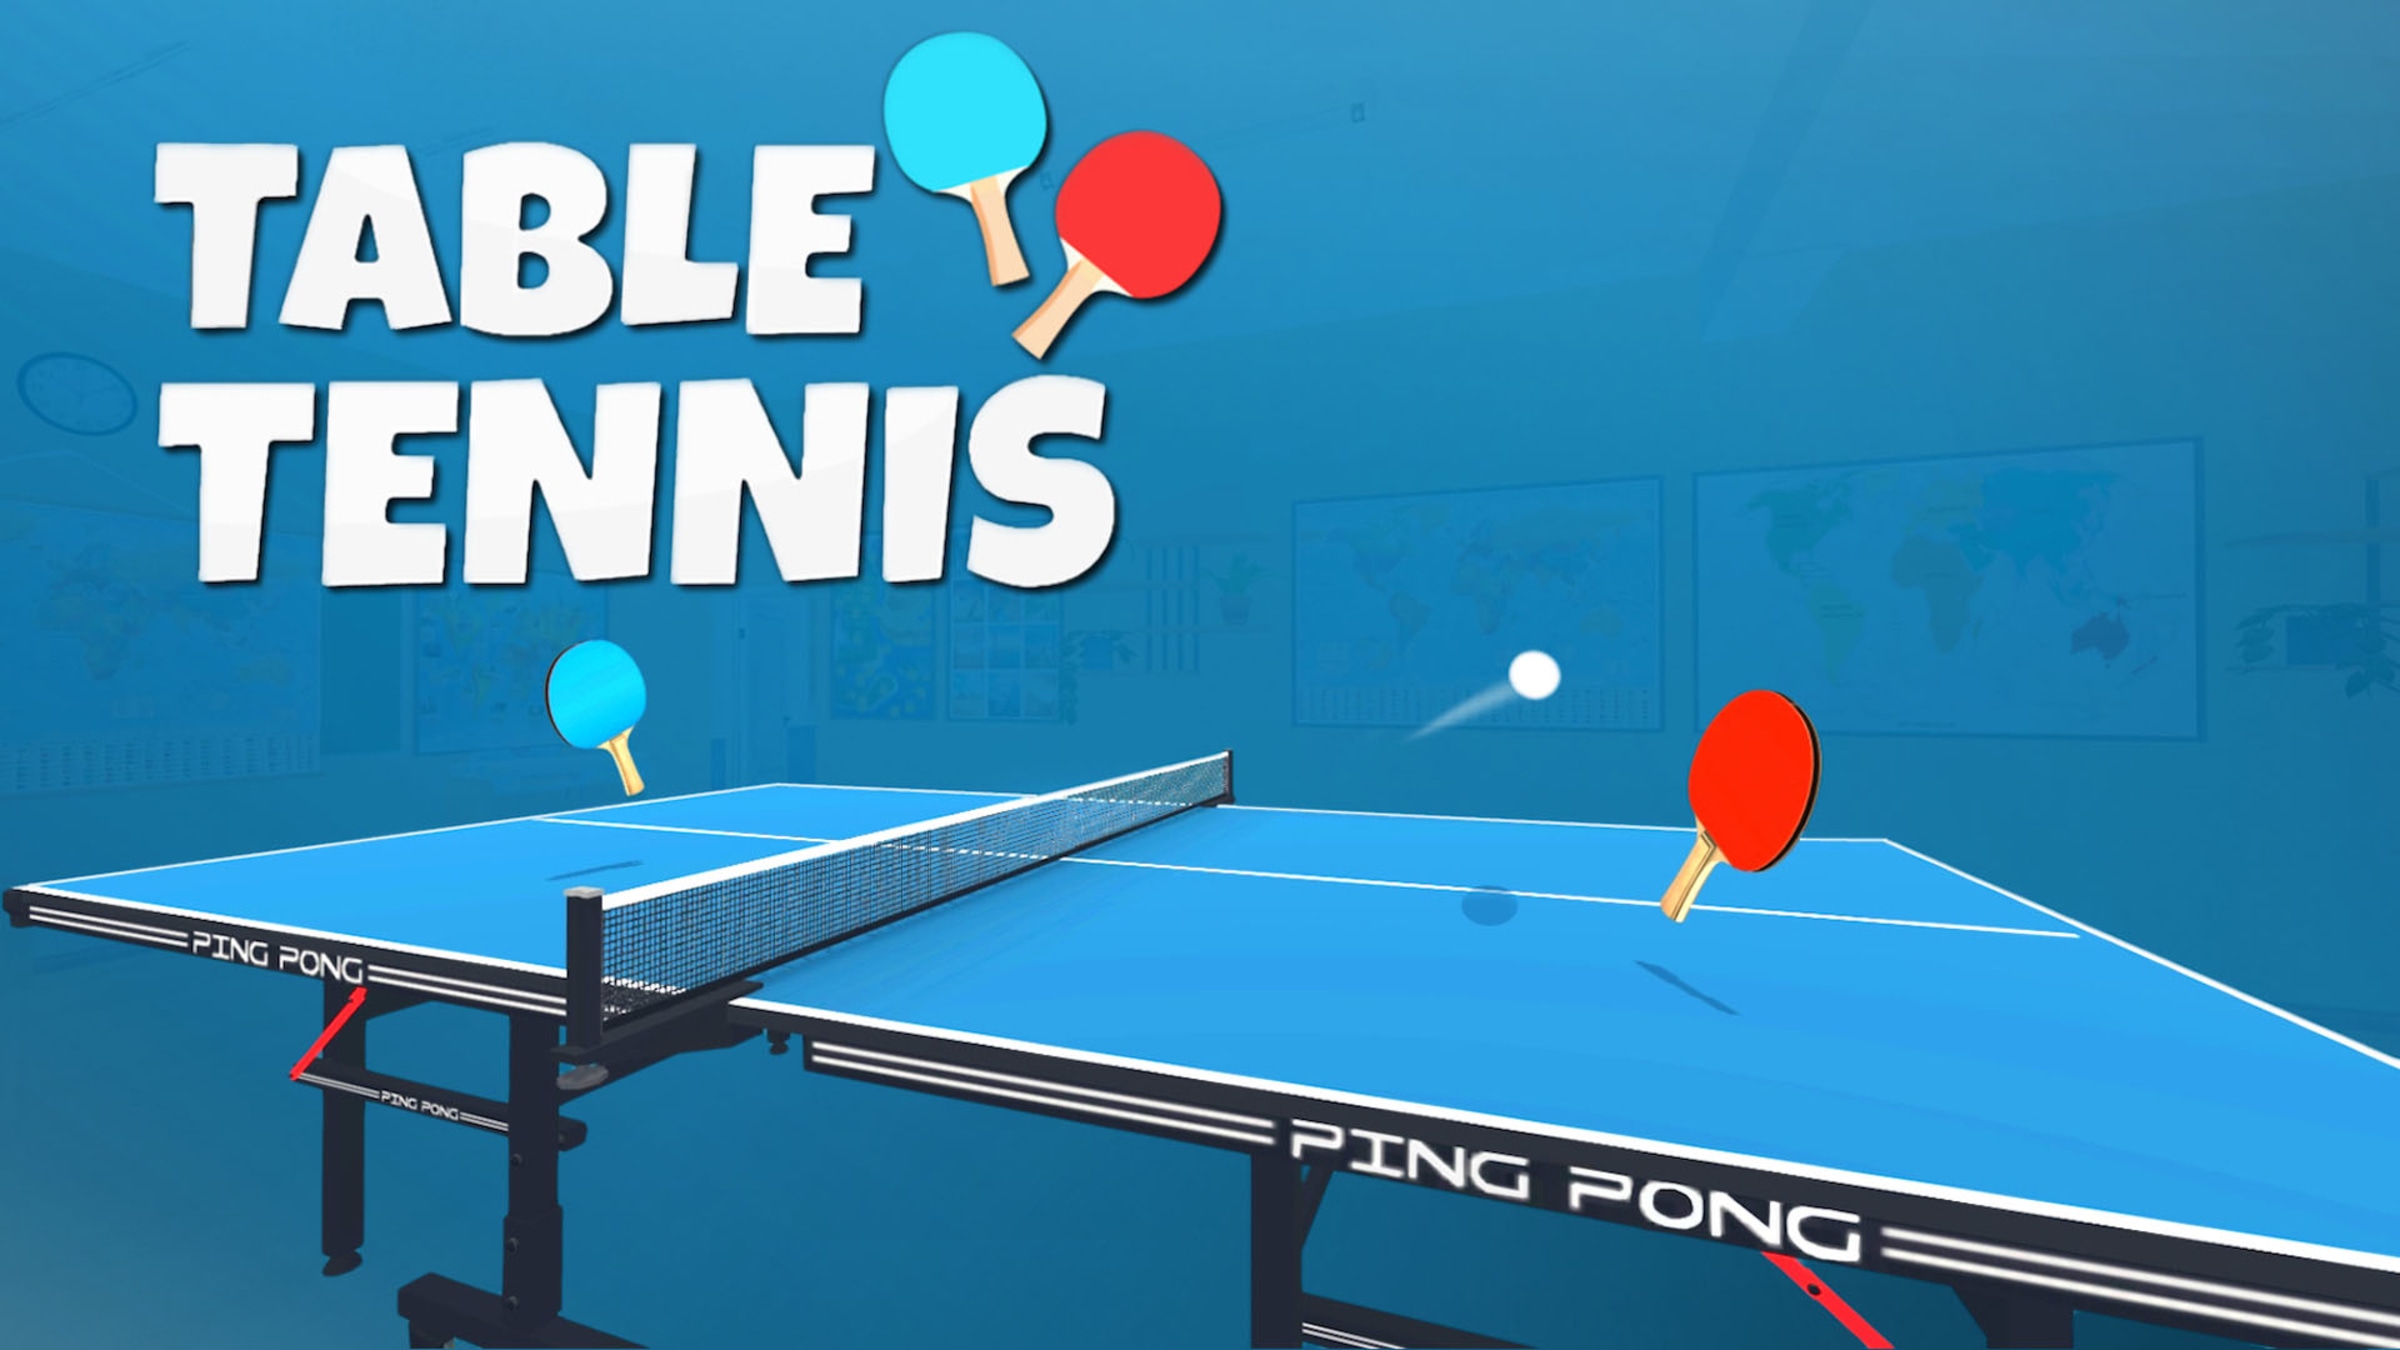 Darken Editor Cater Table Tennis for Nintendo Switch - Nintendo Official Site